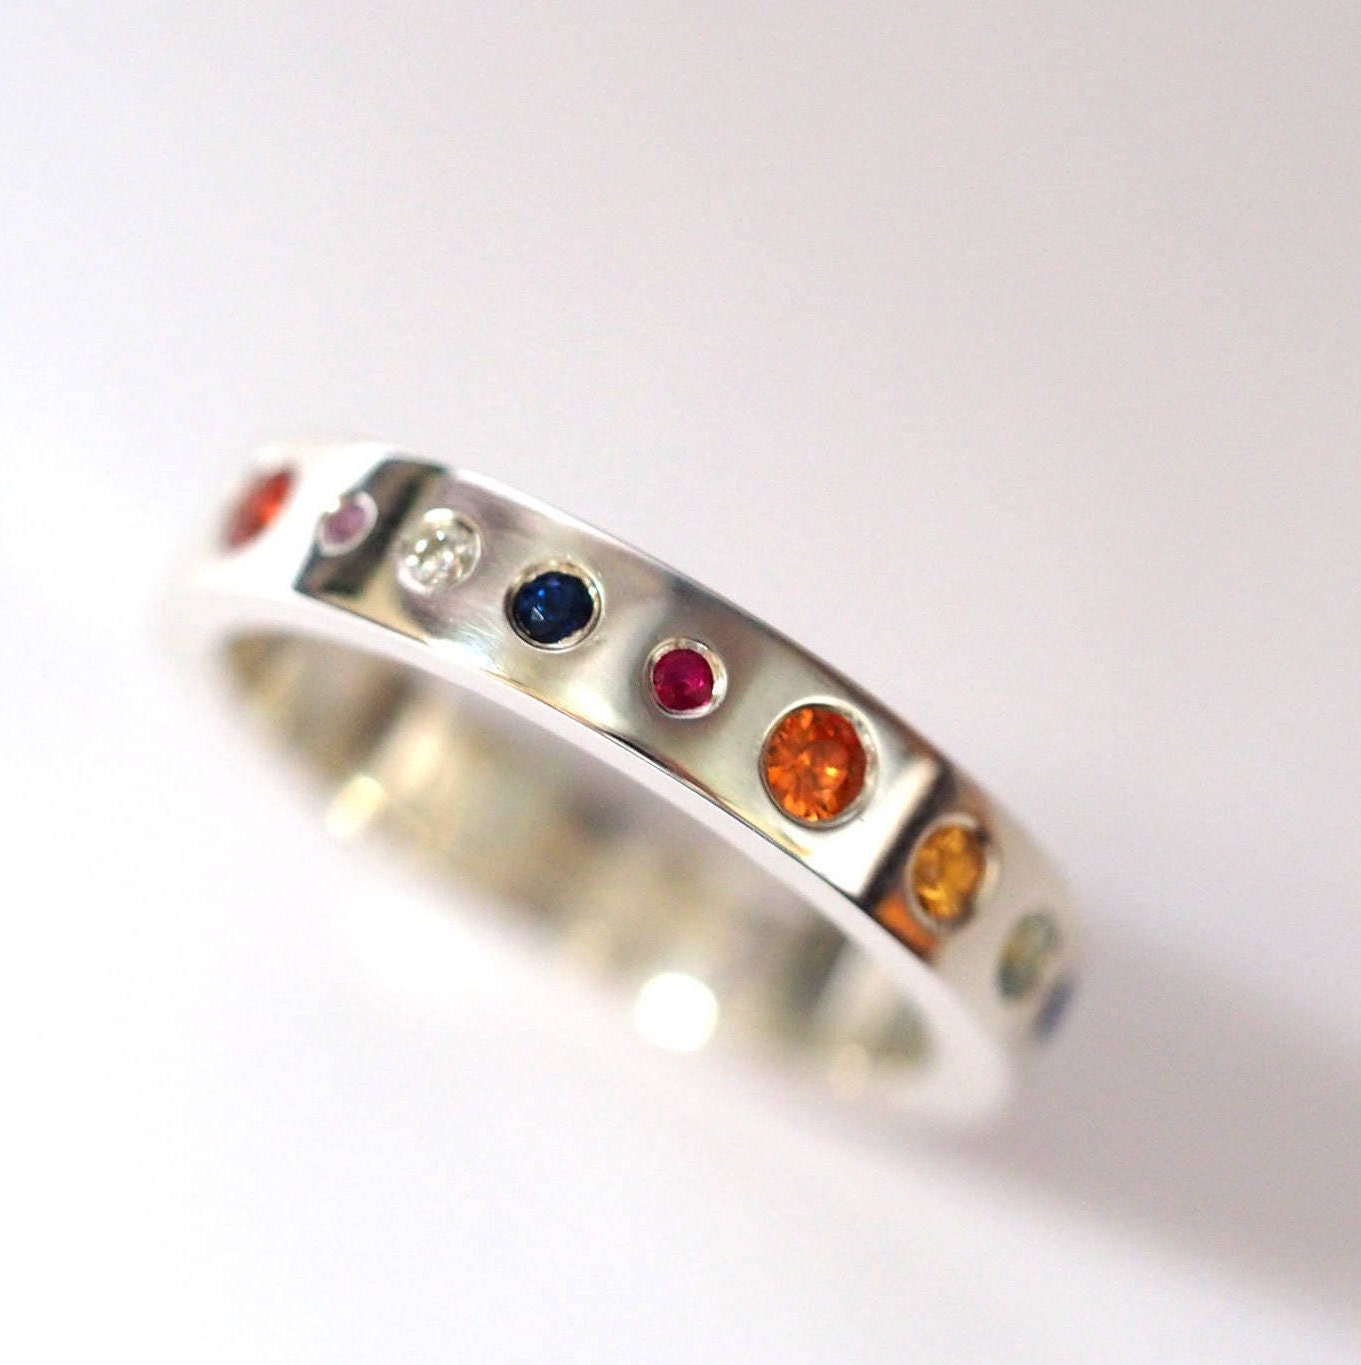 Planet Ring - Recycled 18ct Gold and Precious stones